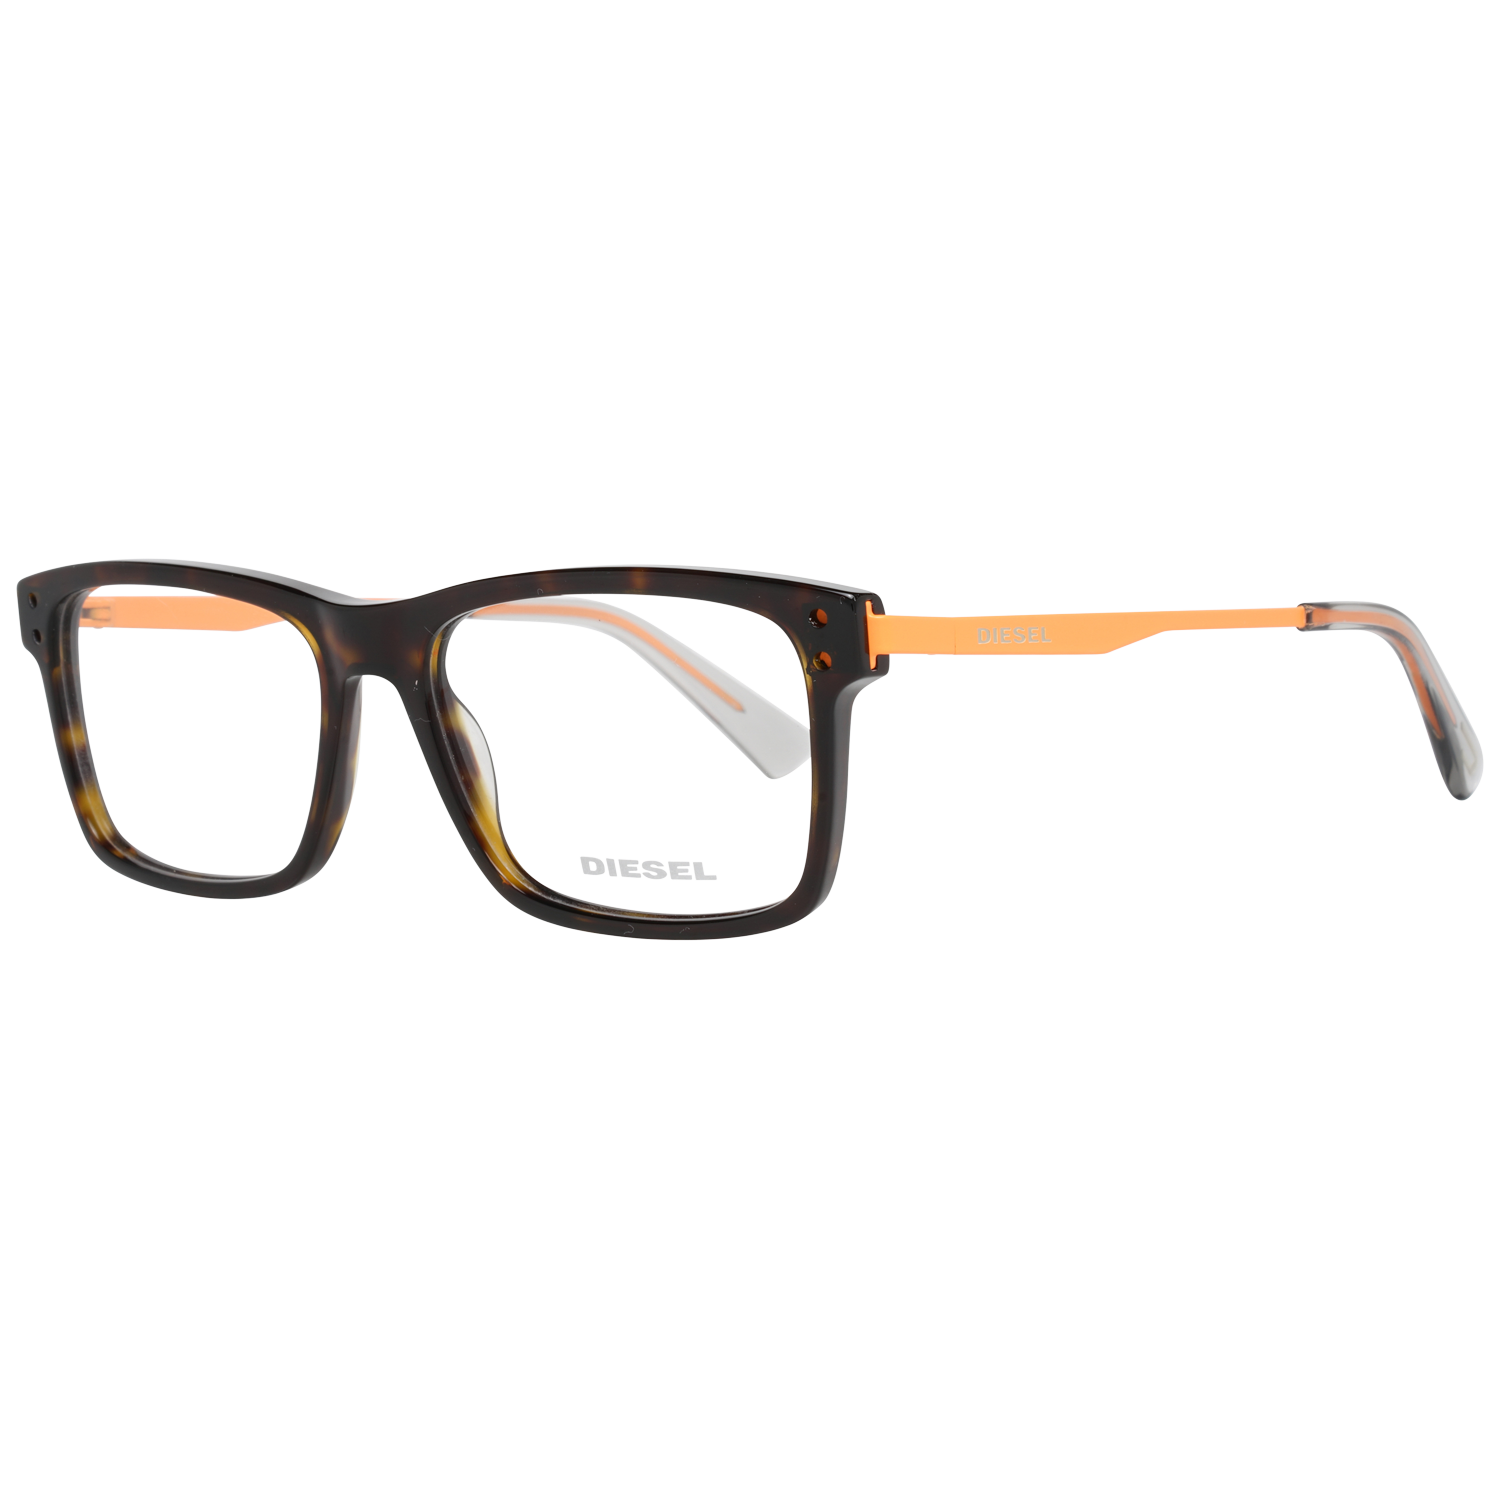 GenderMenMain colorBrownFrame colorBrownFrame materialMetal & PlasticSize54-16-145Lenses width54mmLenses heigth38mmBridge length16mmFrame width138mmTemple length145mmShipment includesCase, Cleaning clothStyleFull-RimSpring hingeNo